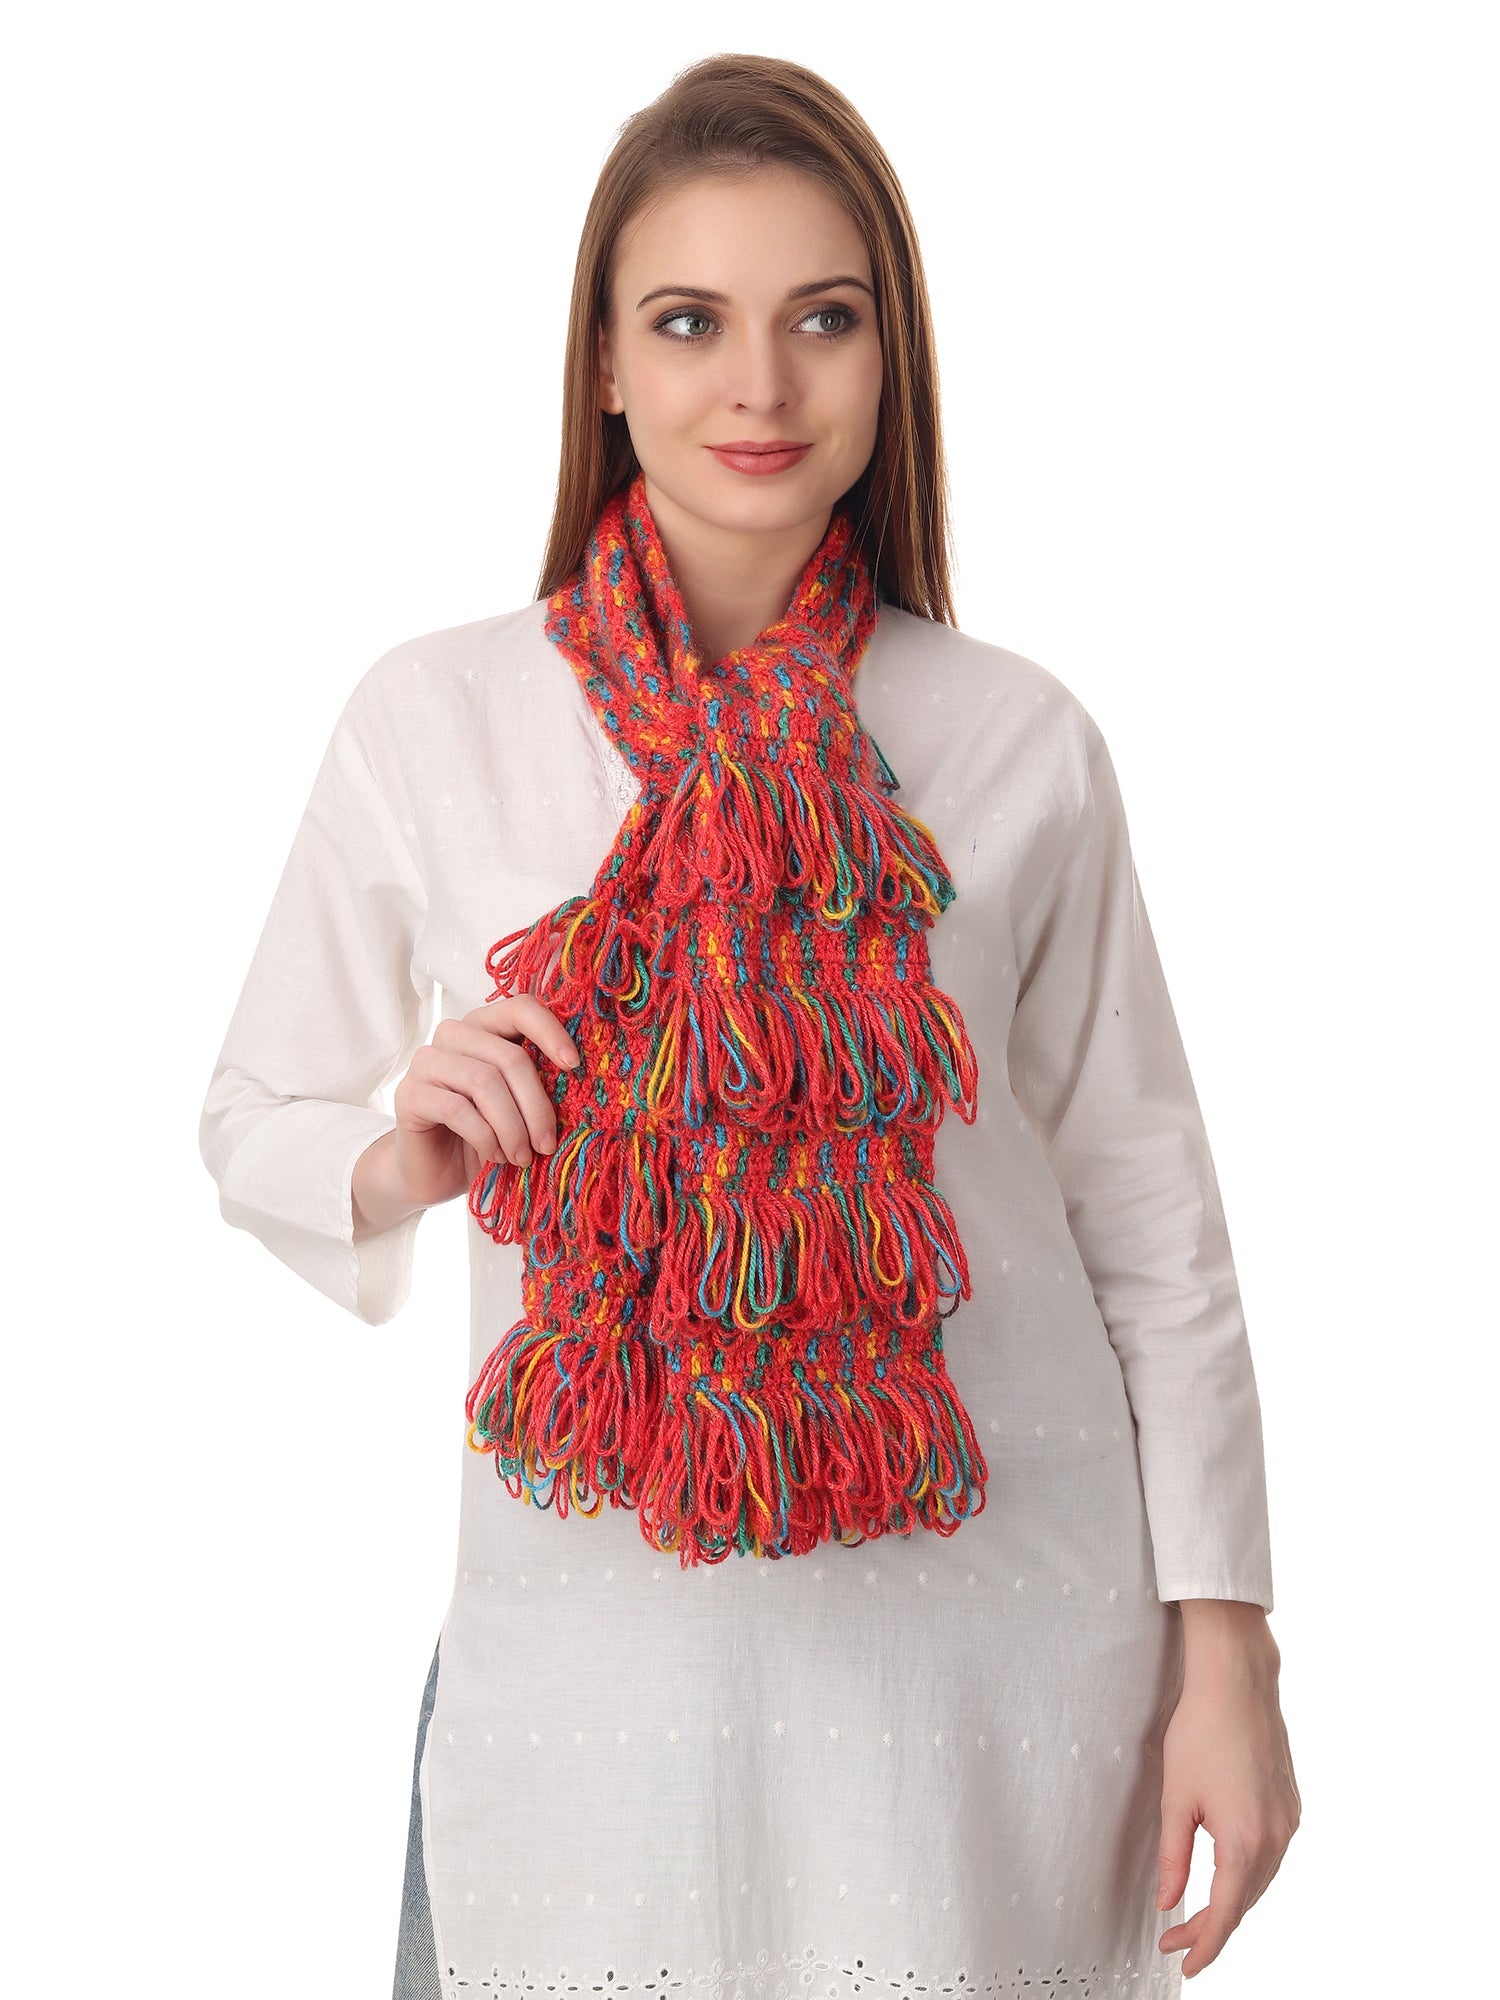 Crimson Carnival Frilled Scarf Happy Cultures